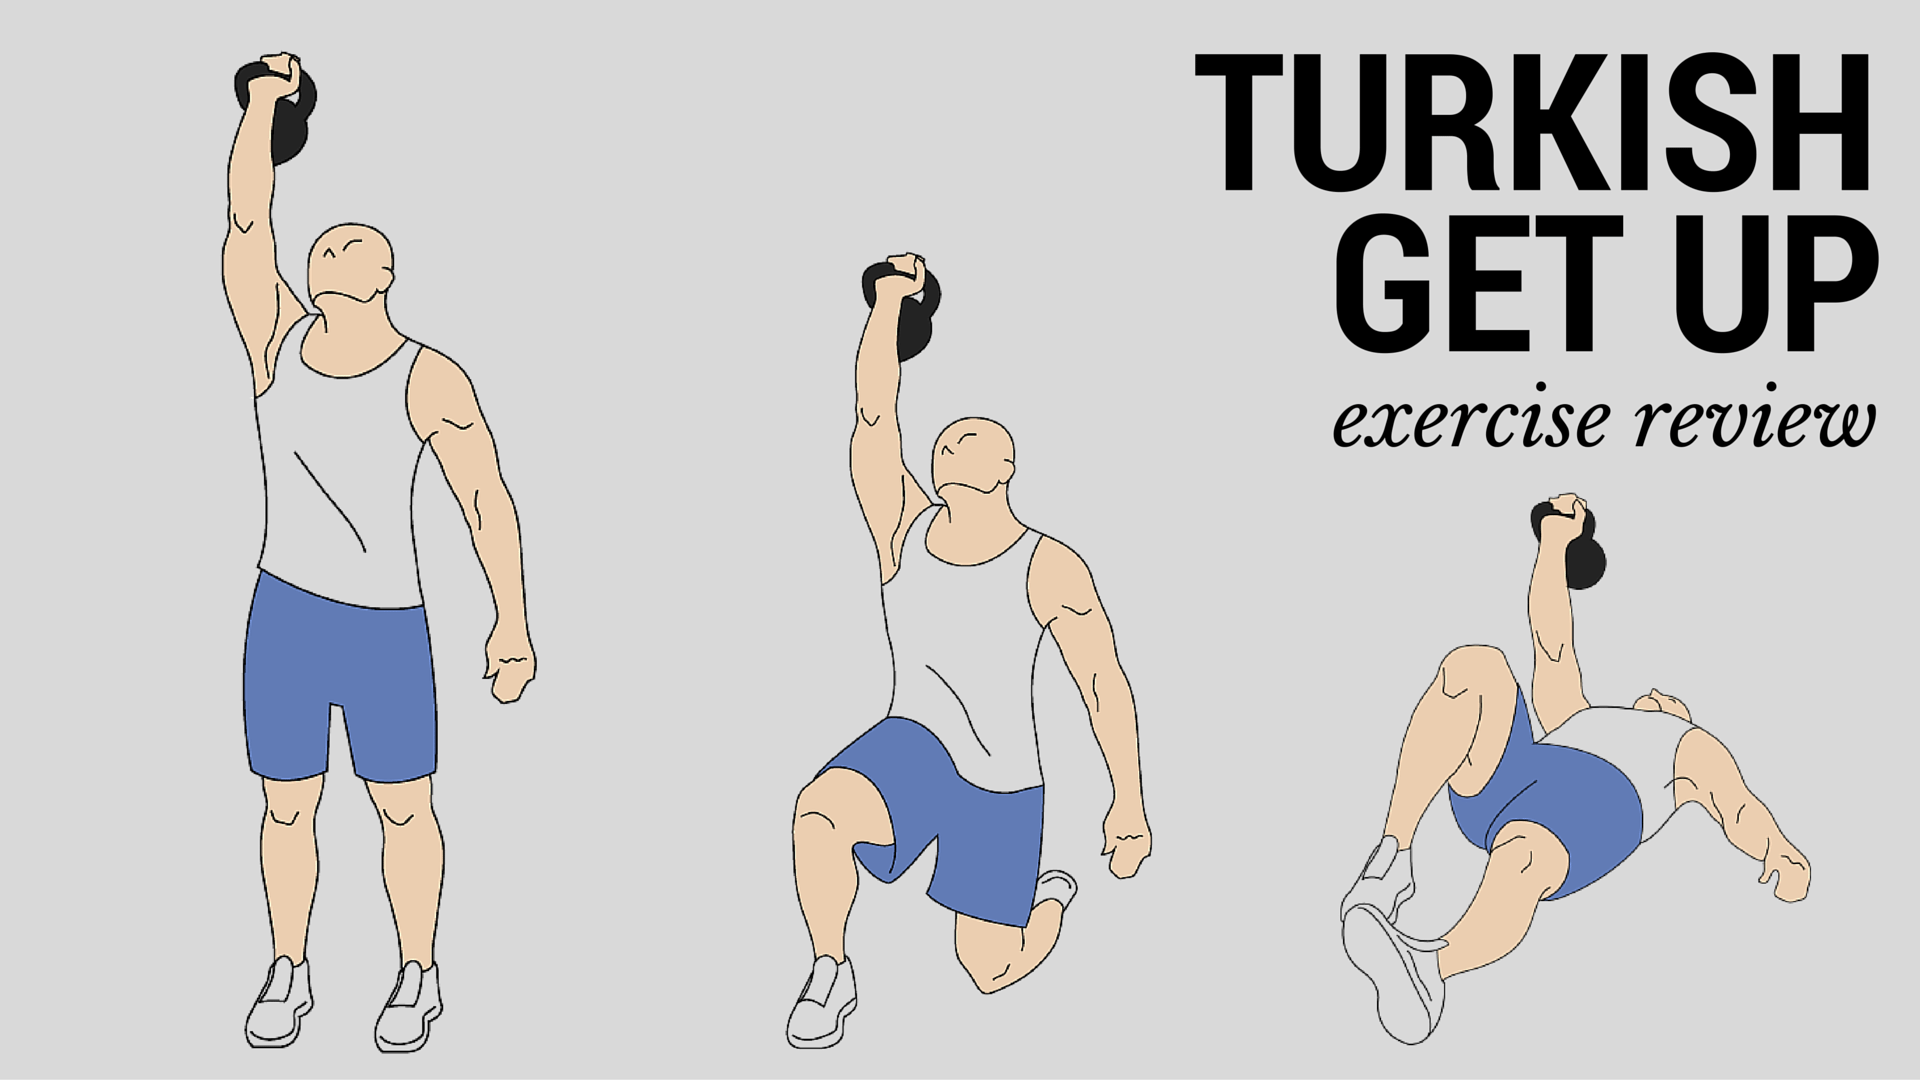 Review exercise. Get exercises. Turkish get up. Turkish get-ups. Get up and go.